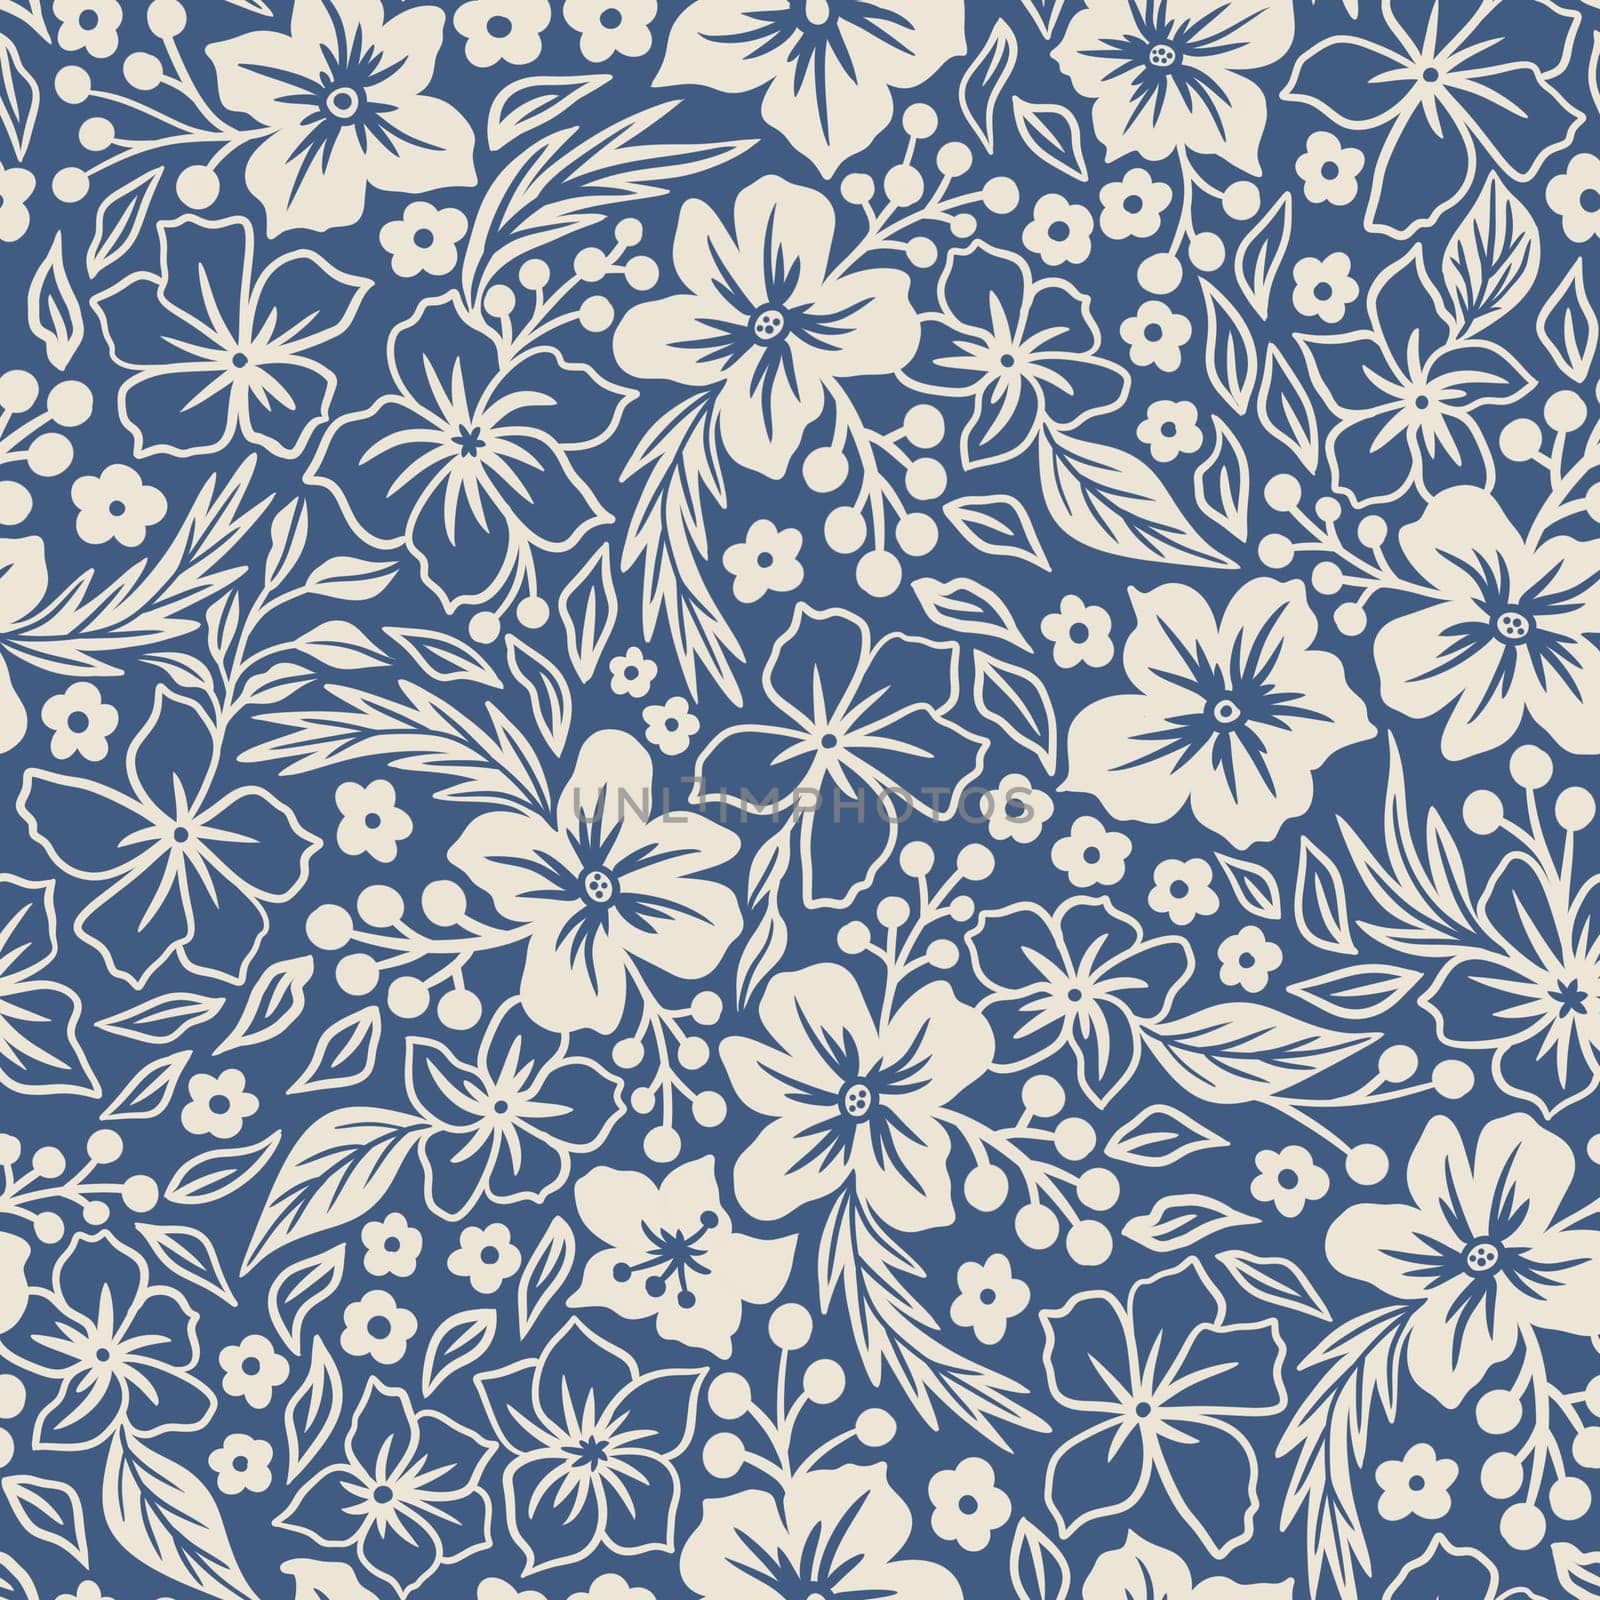 Hand drawn seamless pattern with blue white flowers berries leaves in Chinoiserie wedgewood style. Elegant botanical illustration bloom blossom spring summer garden, bouquet textile fabric wallpaper, realistic romantic vintage print. by Lagmar